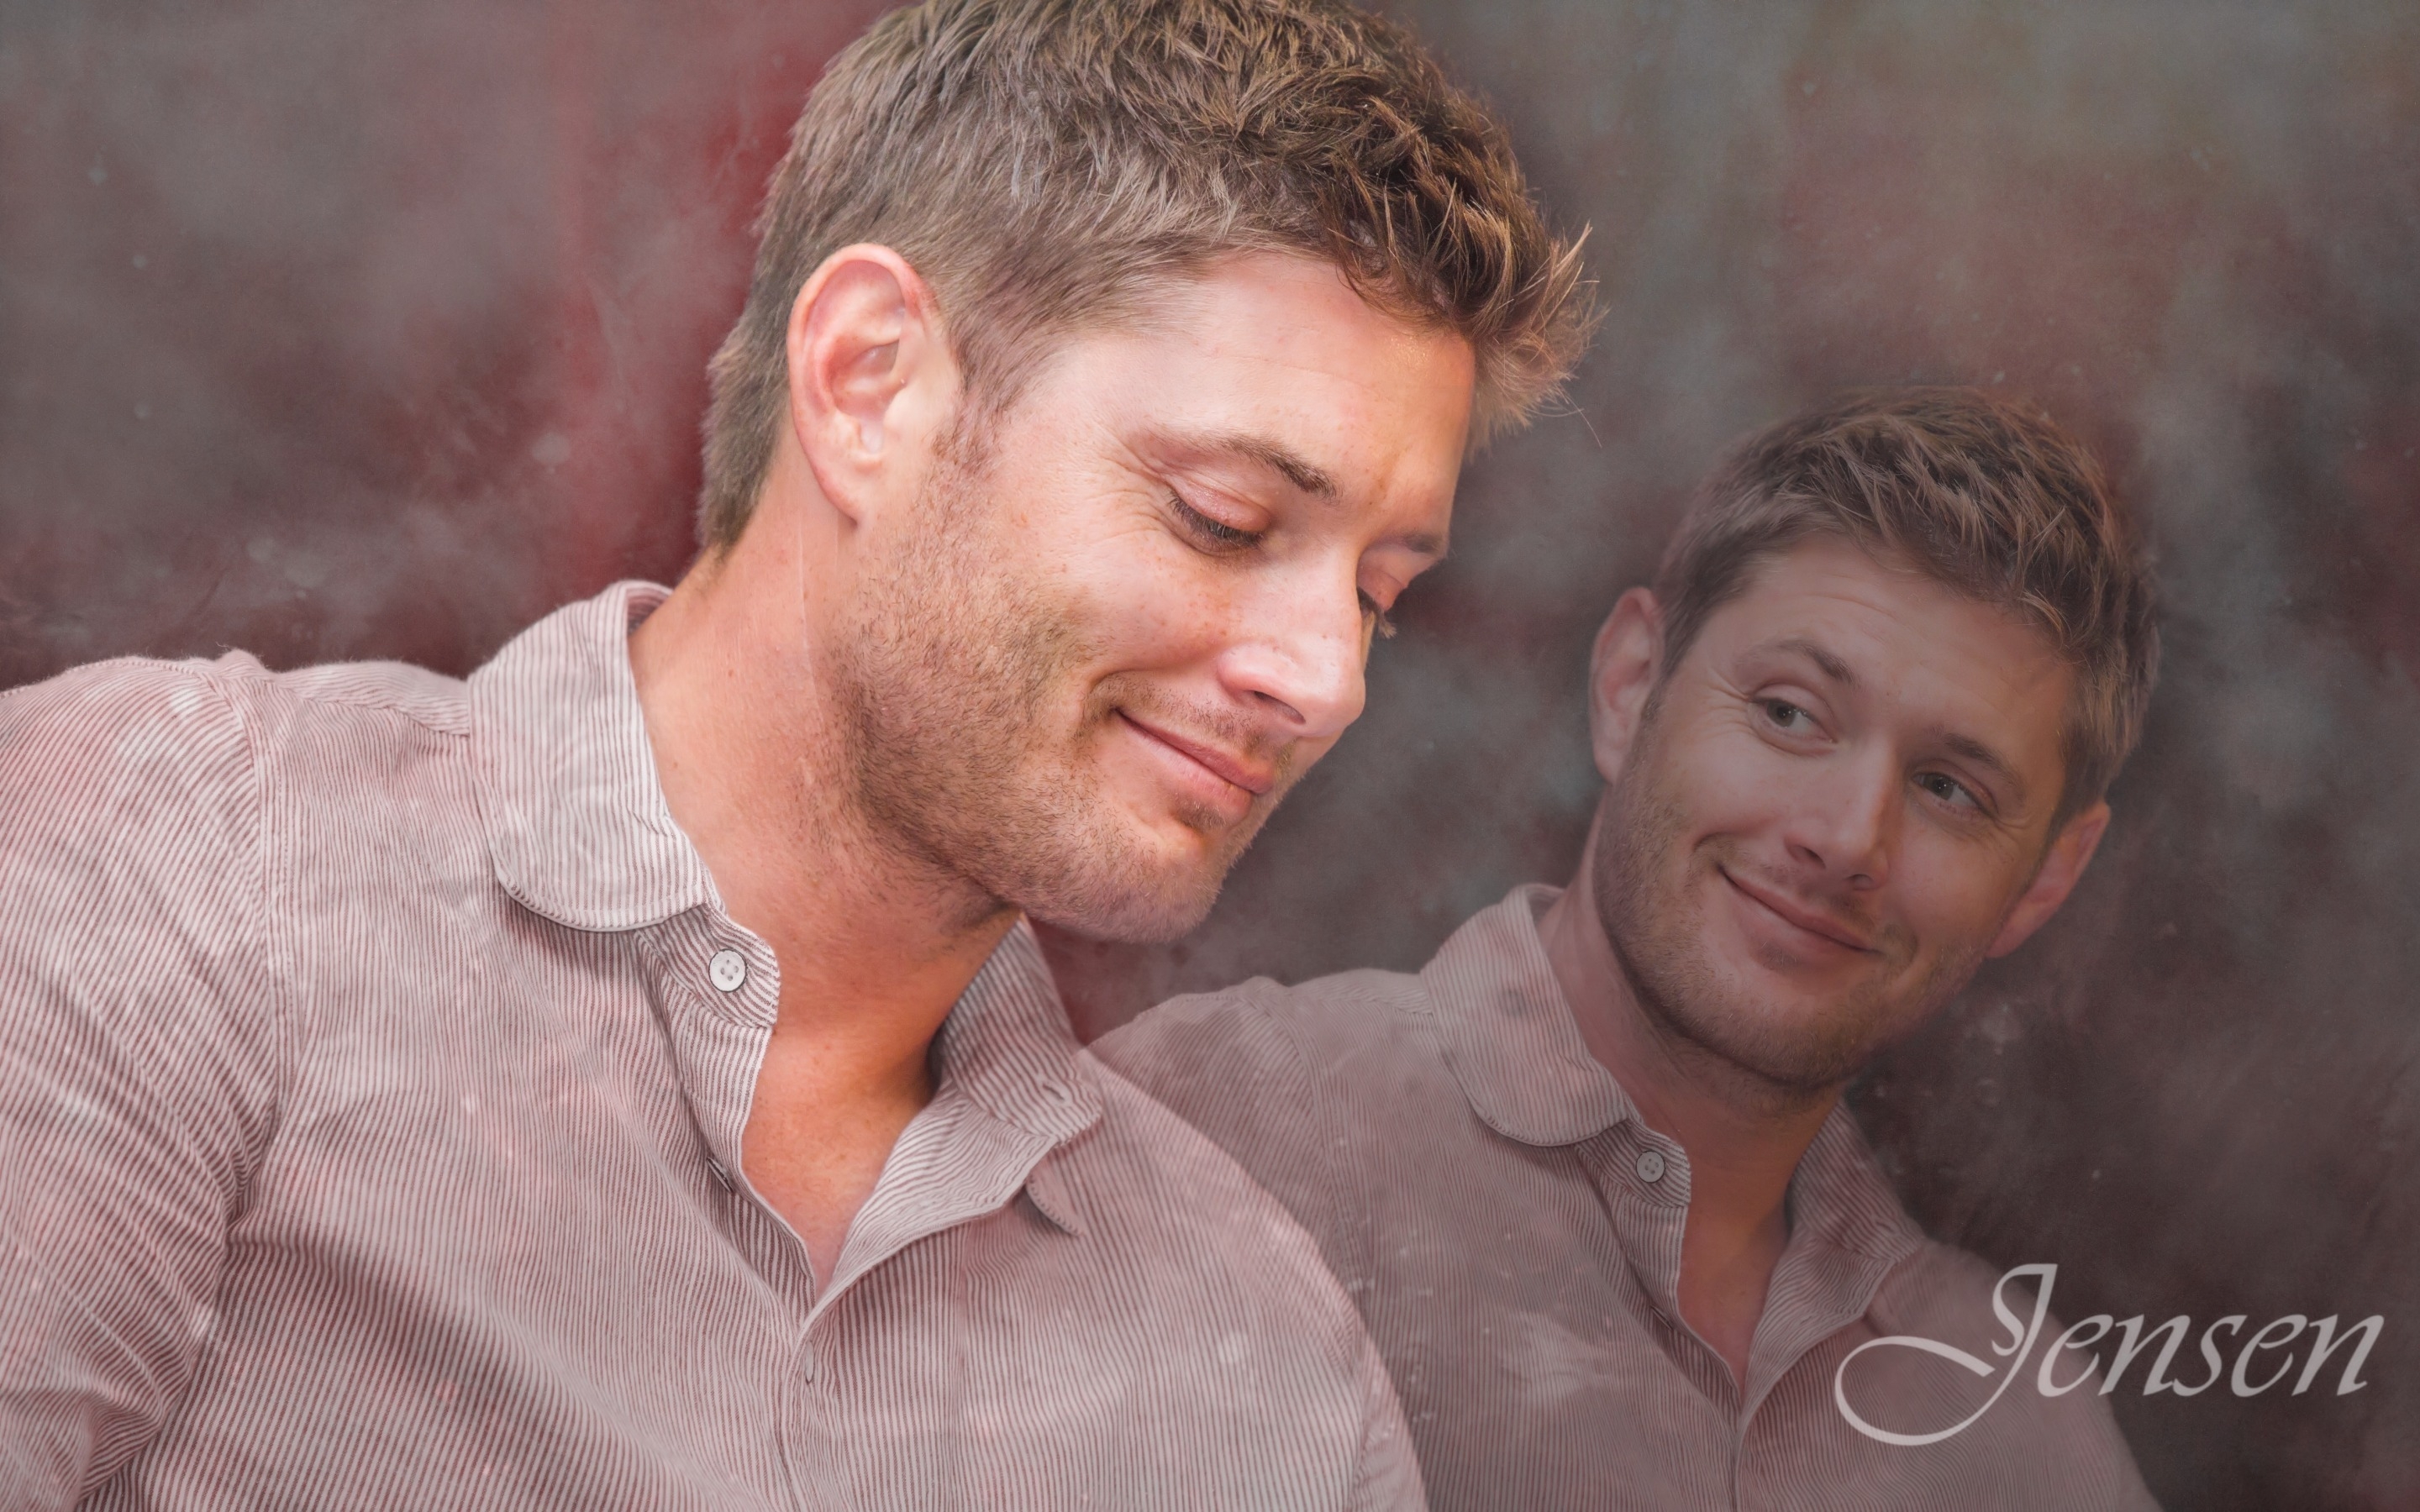 Jensen Ackles Cute Smile for 2880 x 1800 Retina Display resolution